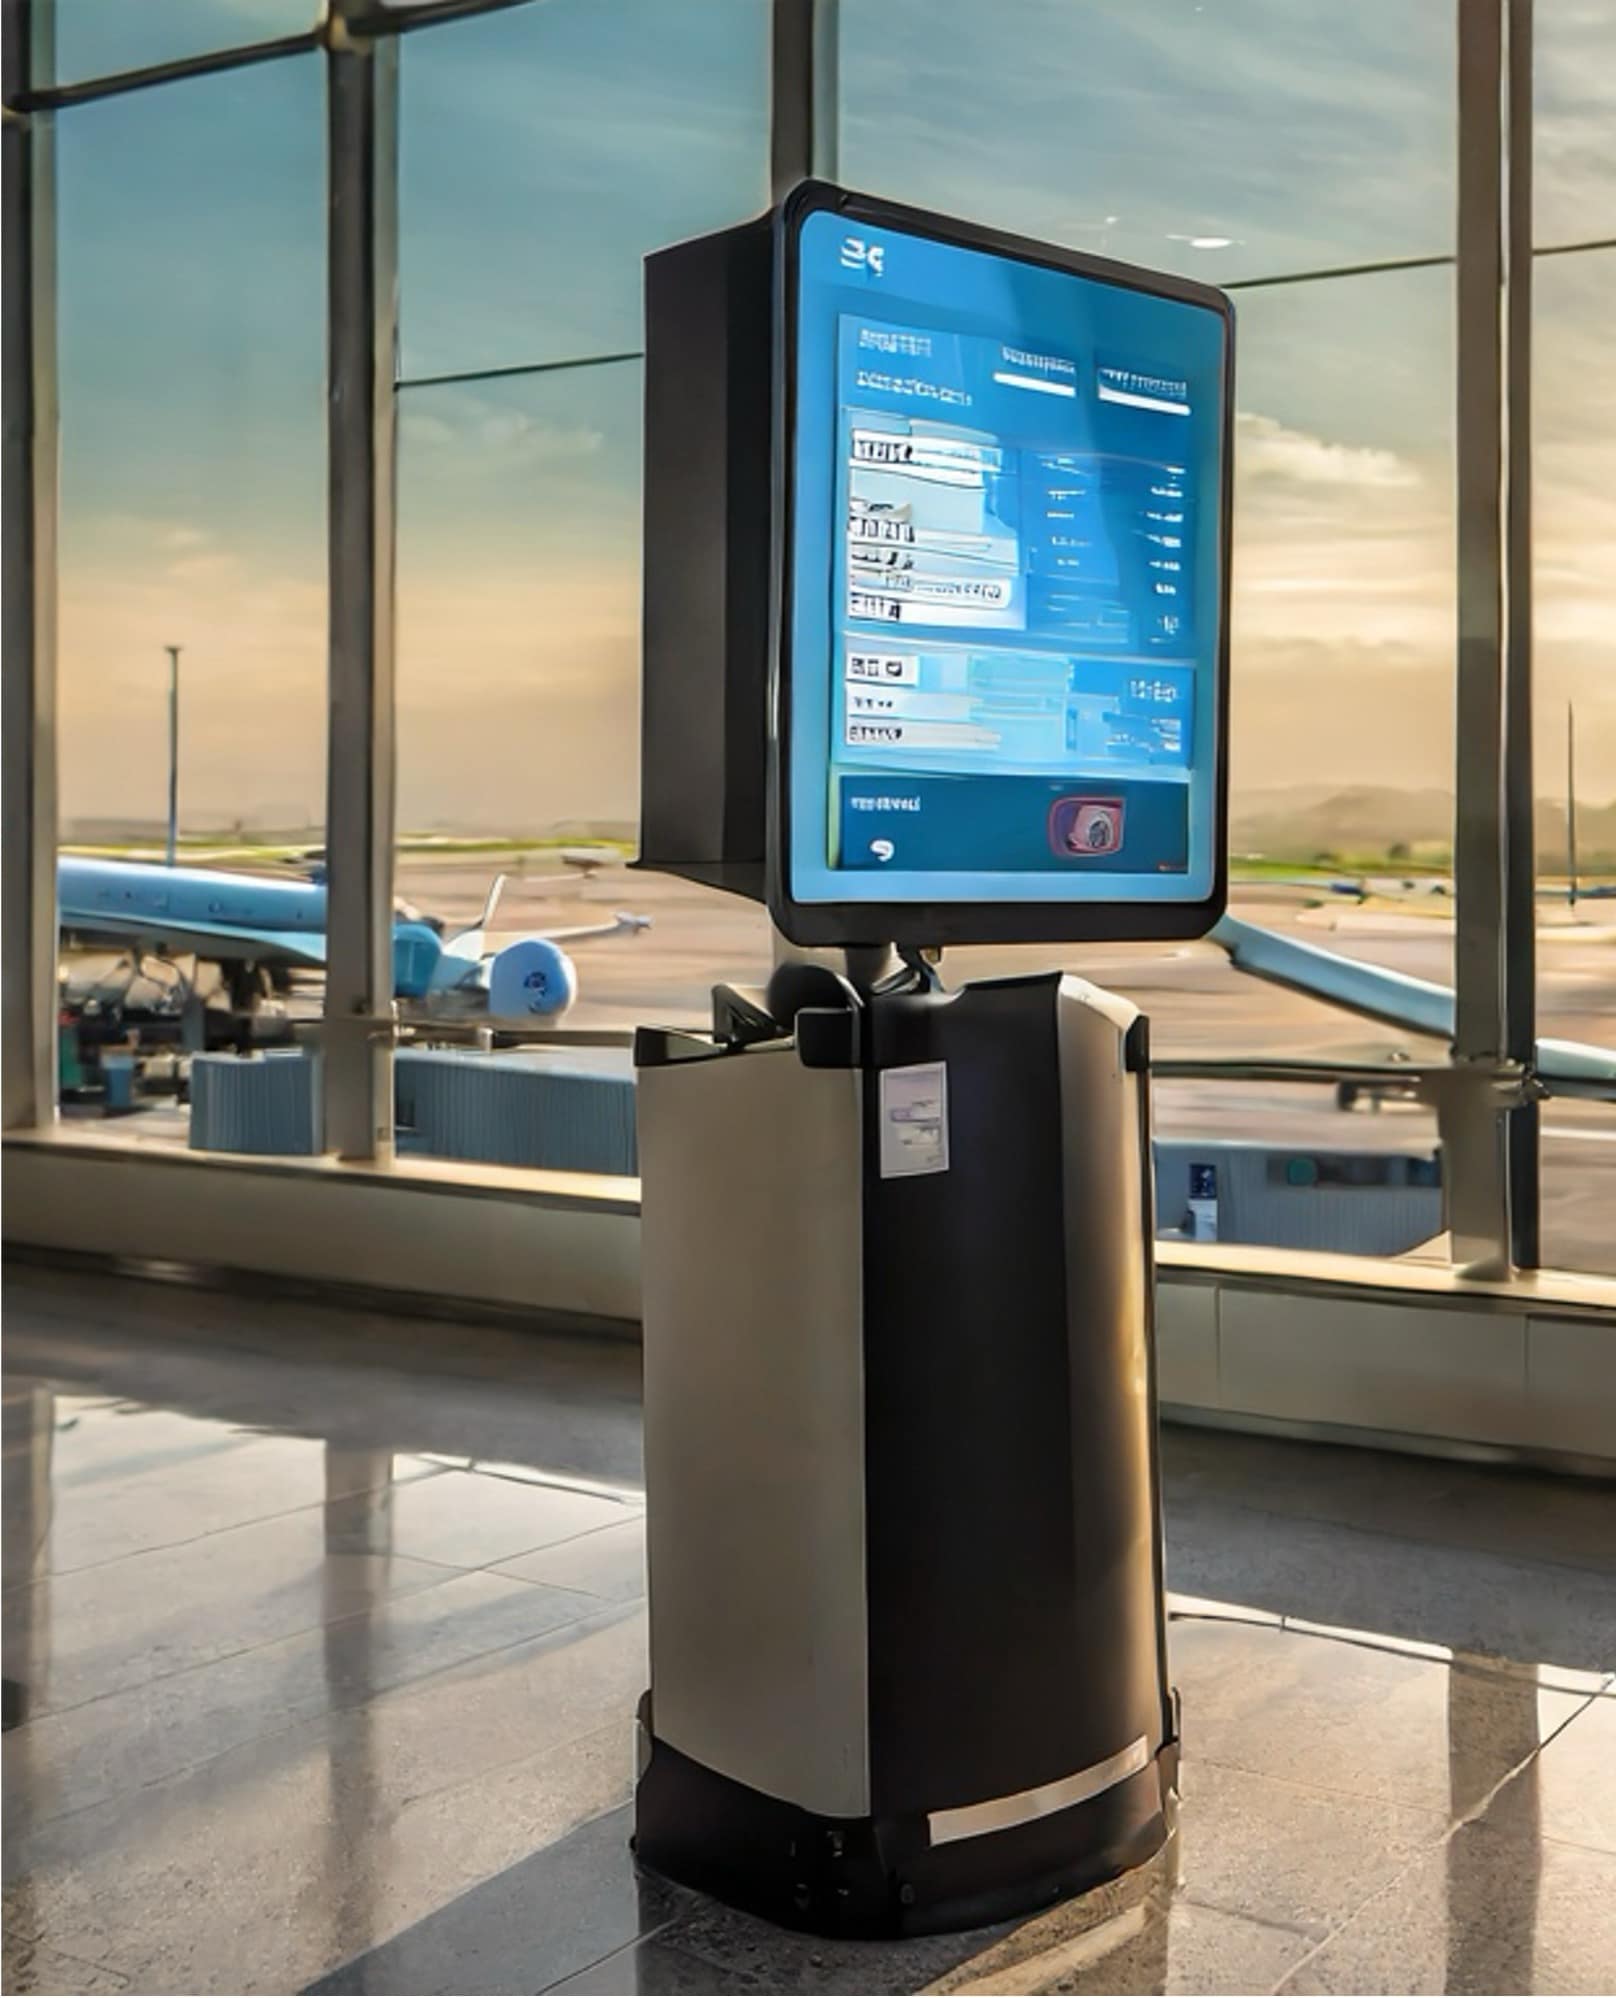 An illustration depicts what an A.I.I.C.E. kiosk could look like at Changi Airport.